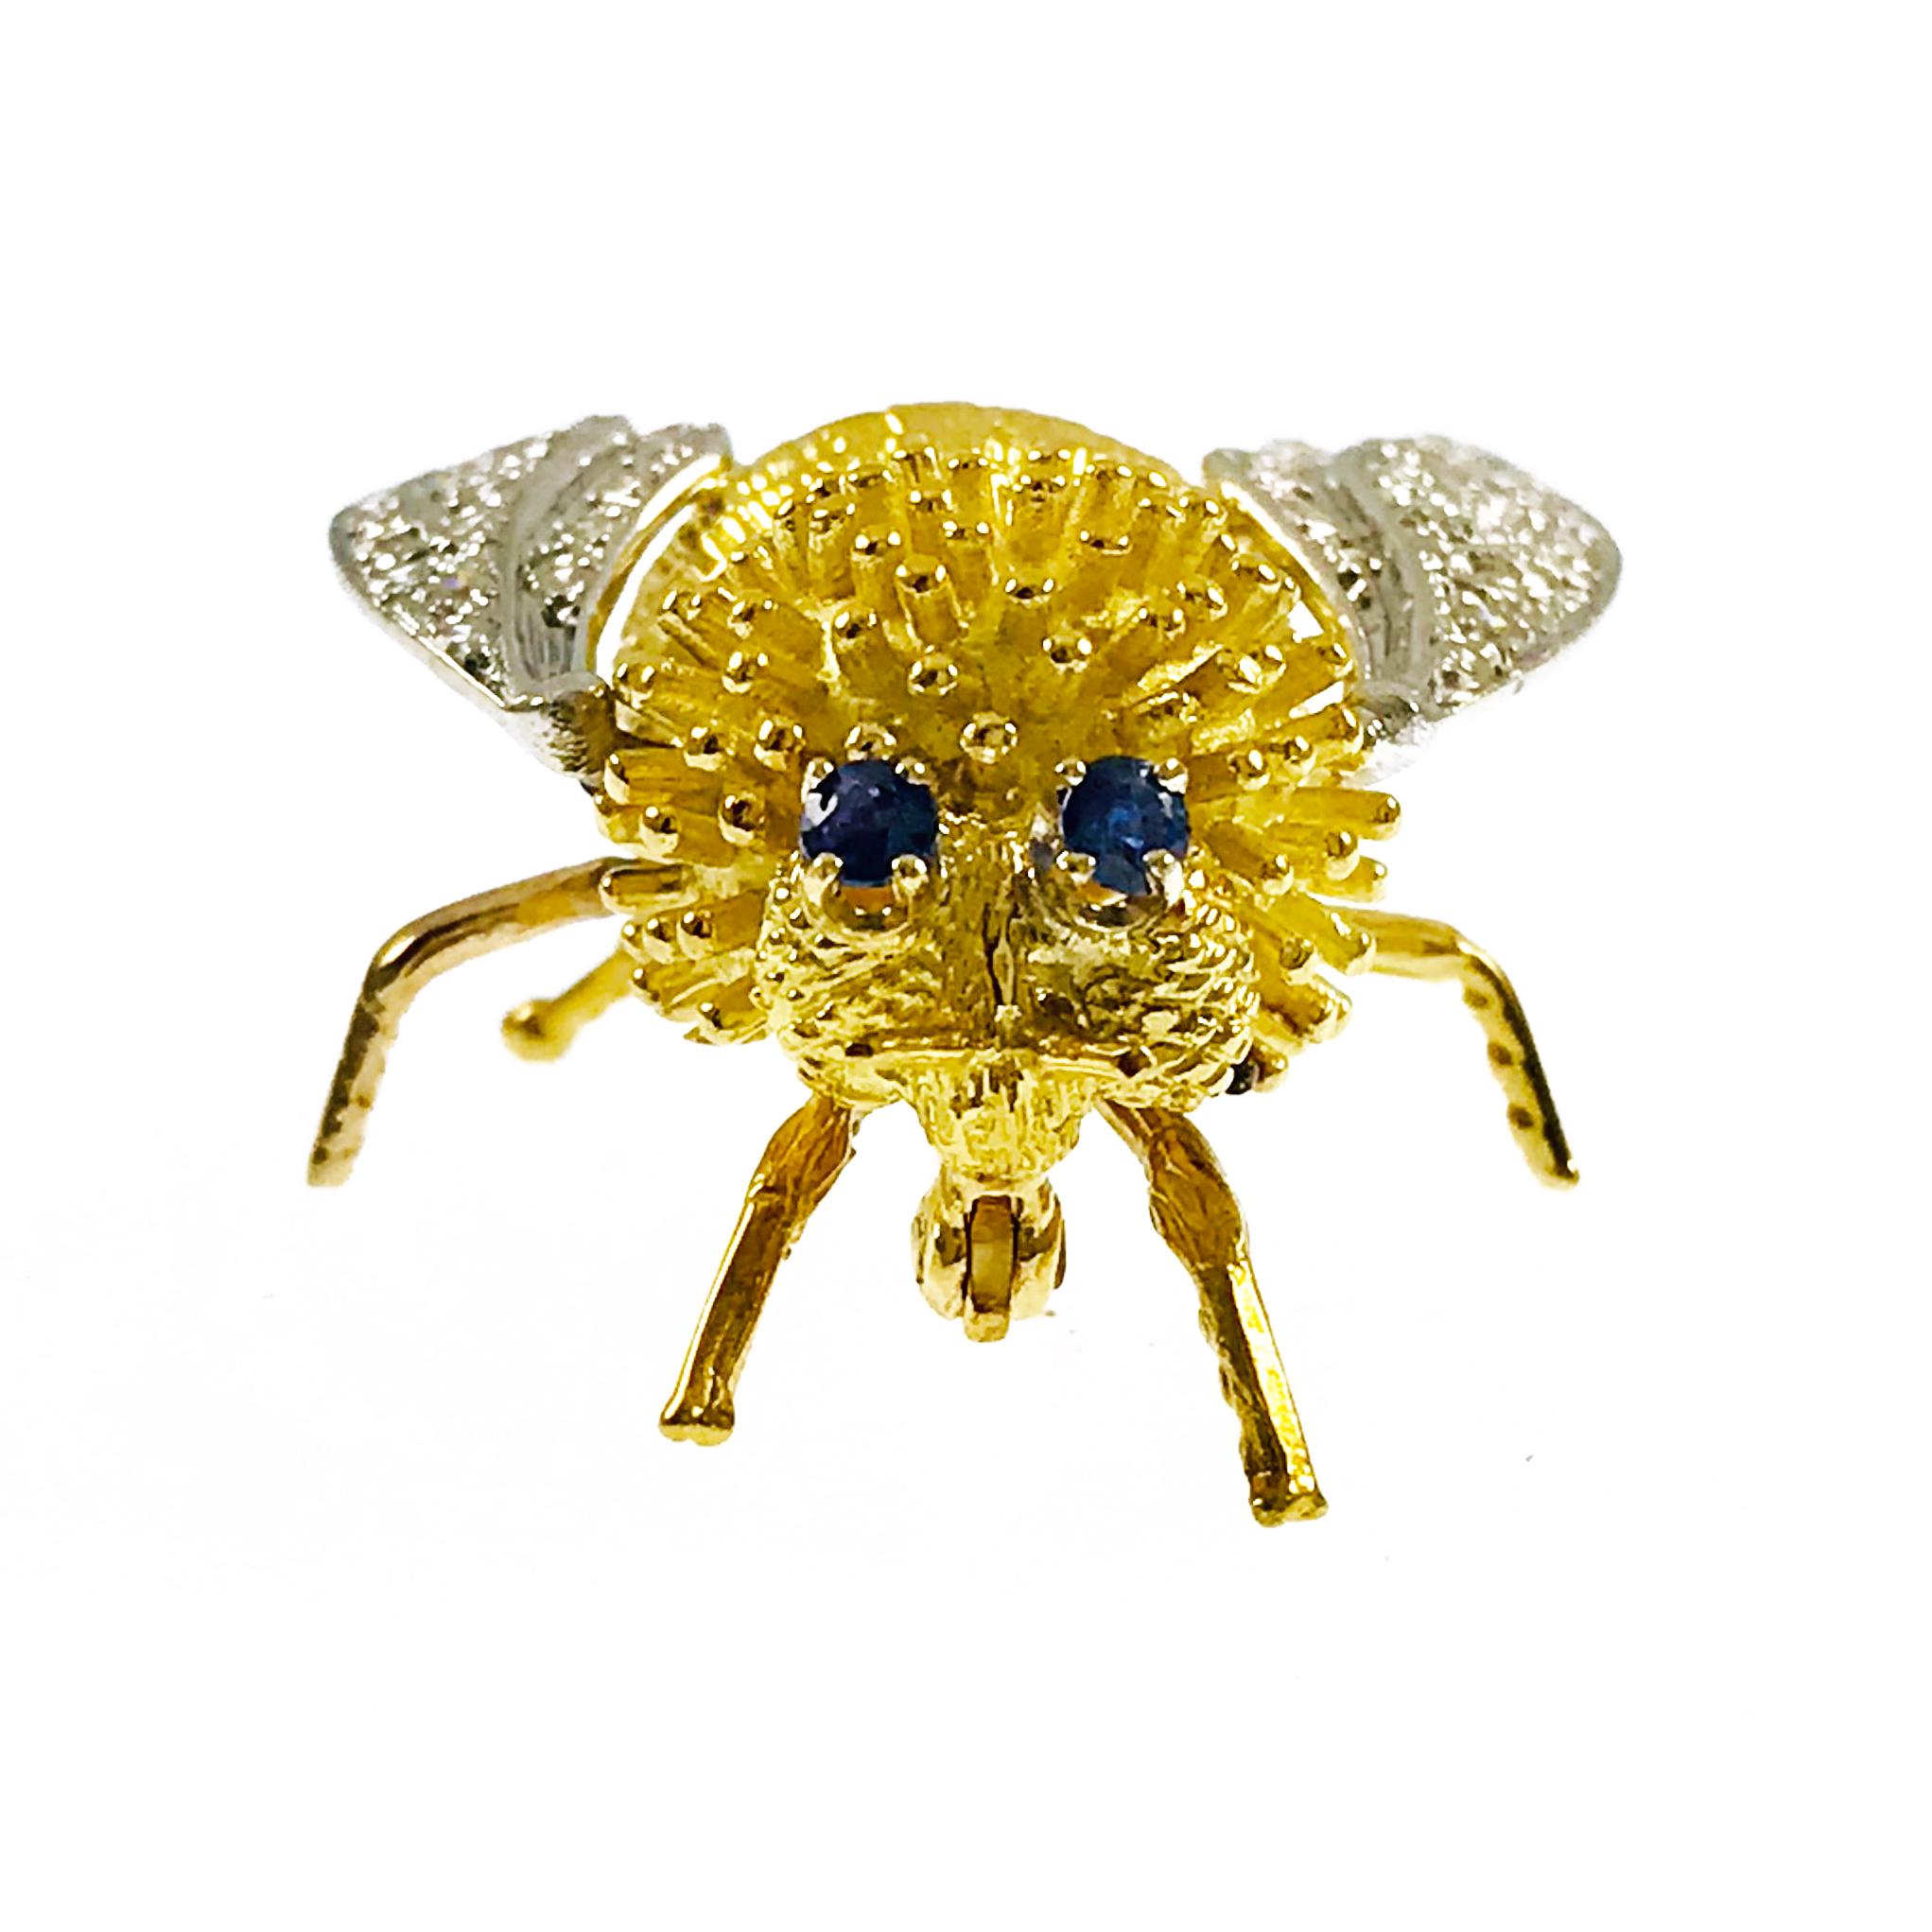 18k Gold Two-Tone Diamond Sapphire Bee Fly Brooch. There is fine textured detail in the body and in the outspread wings. Fifty-three round 1.35mm single cut diamonds adorn the wings. Diamonds are VS (G.I.A.) in clarity and G-H (G.I.A.) in color with